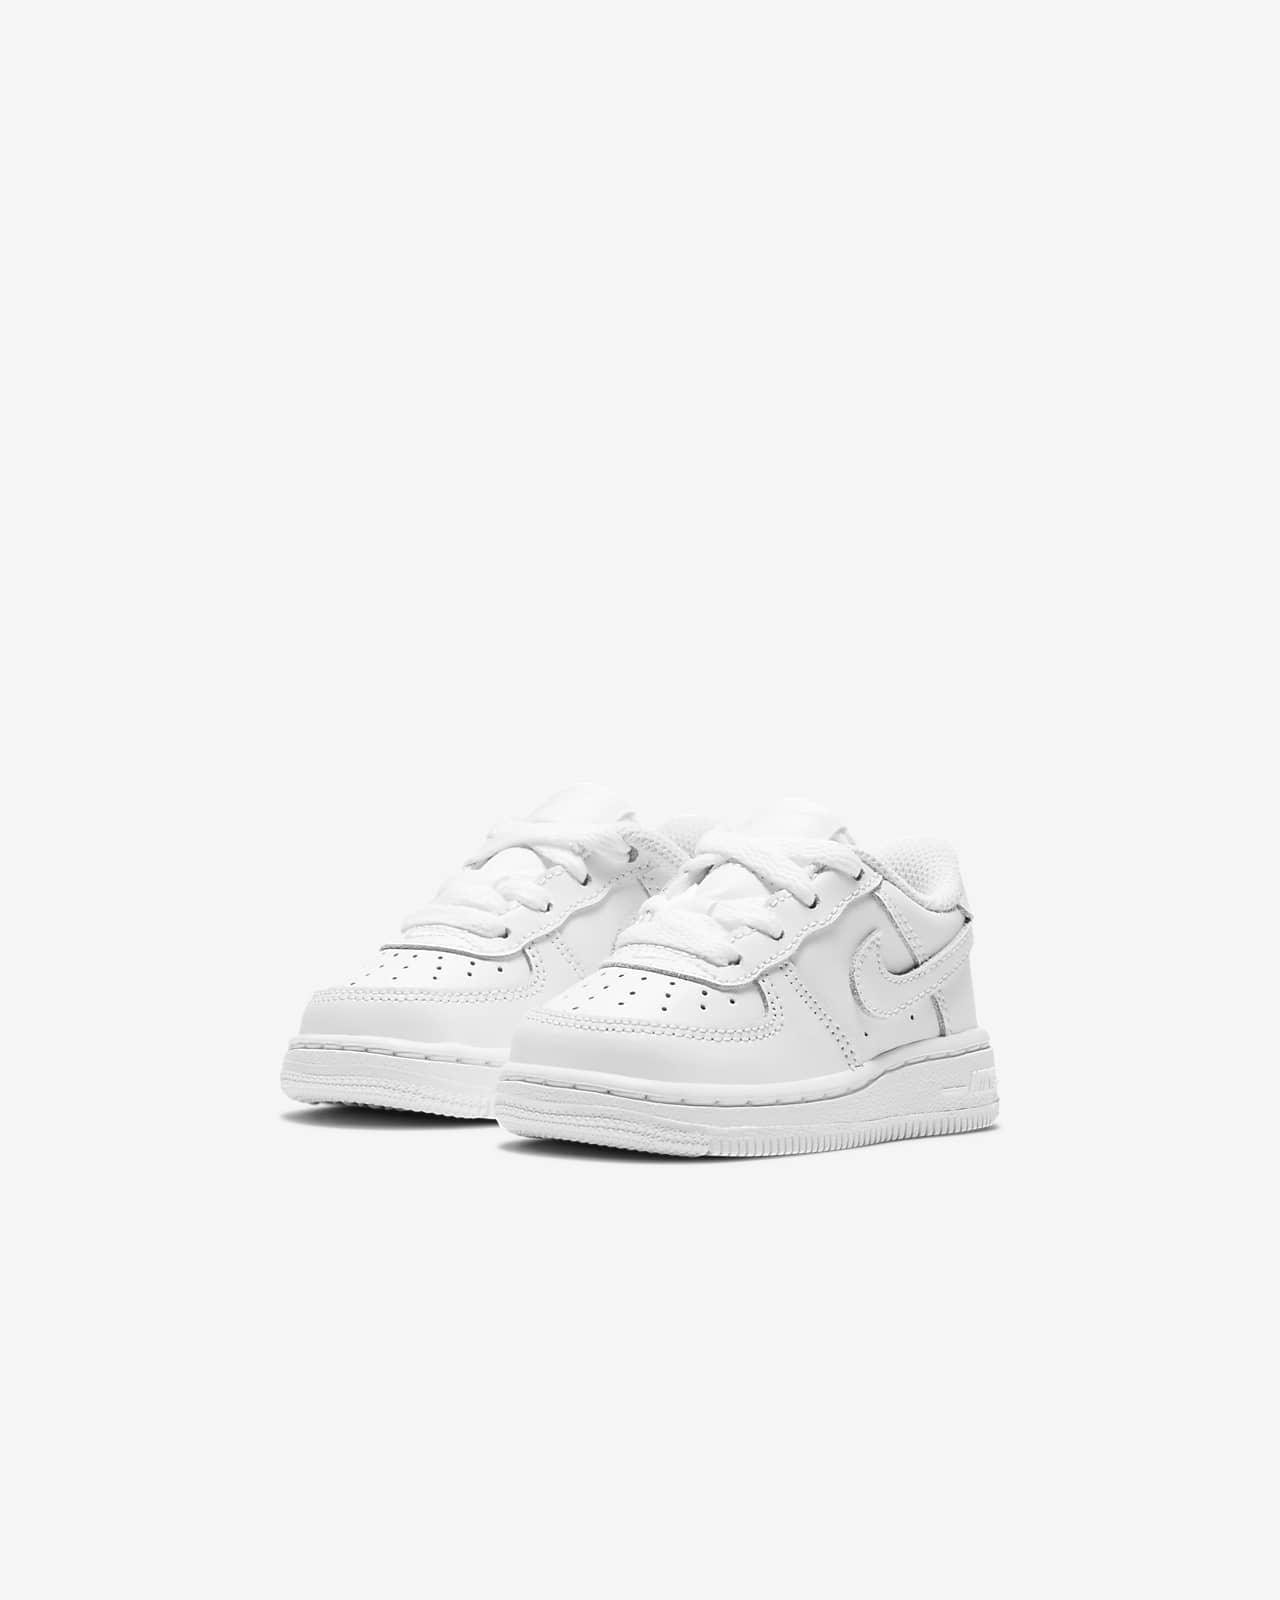 nike air force 1 baby sale